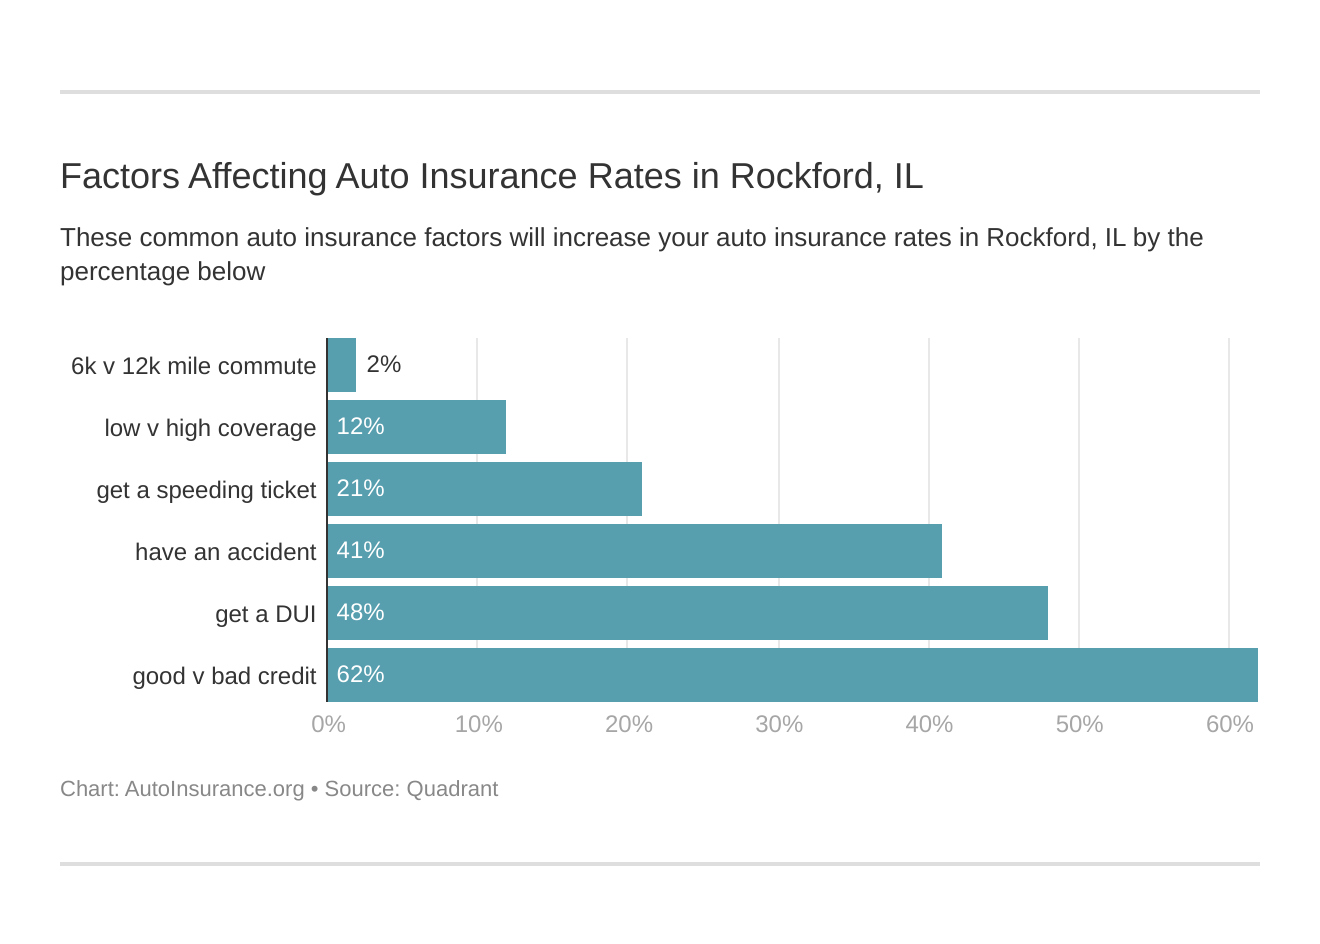 Factors Affecting Auto Insurance Rates in Rockford, IL